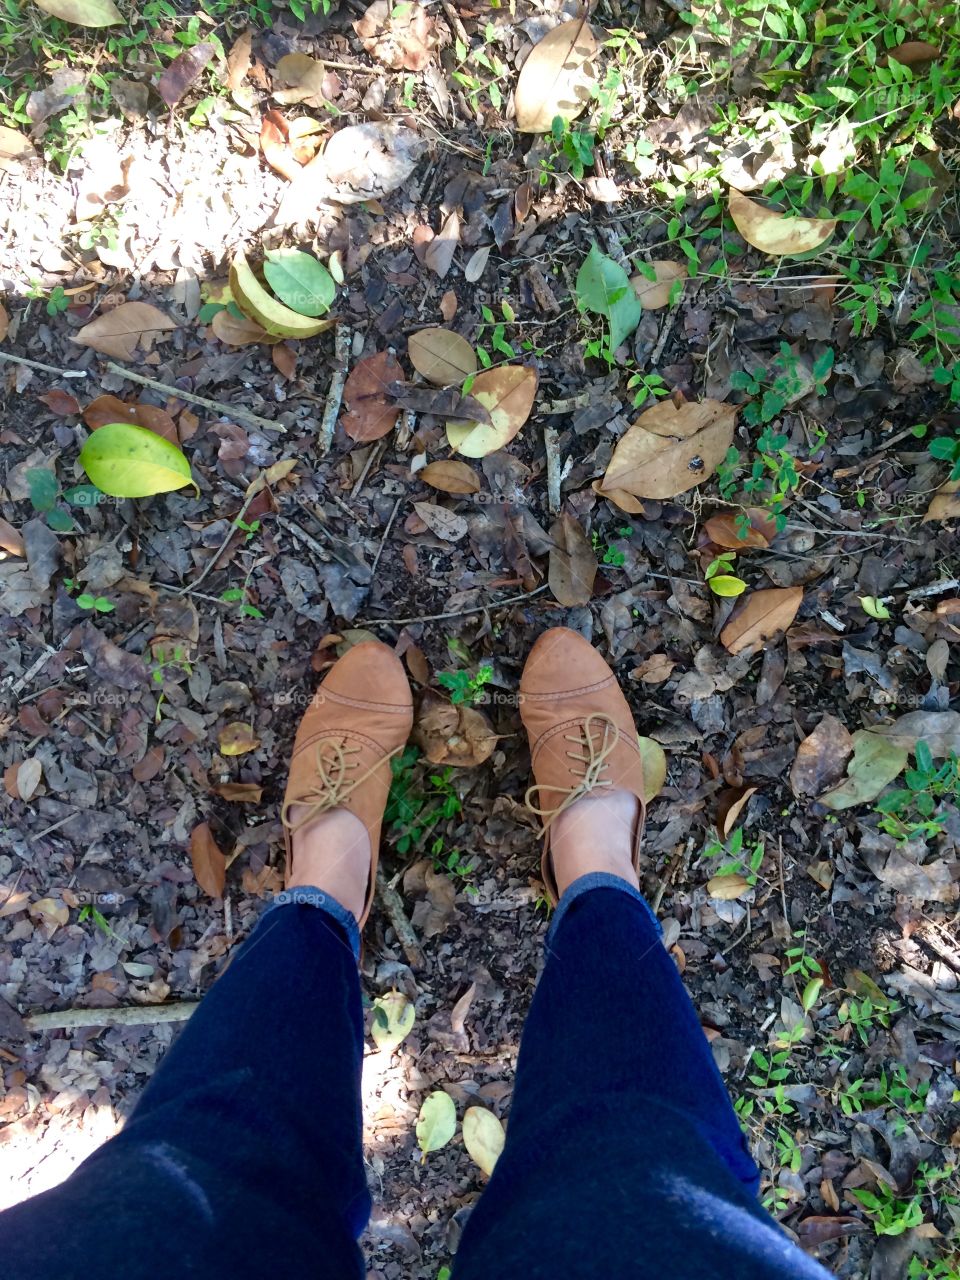 My favorite oxfords on the forest floor, fall. 